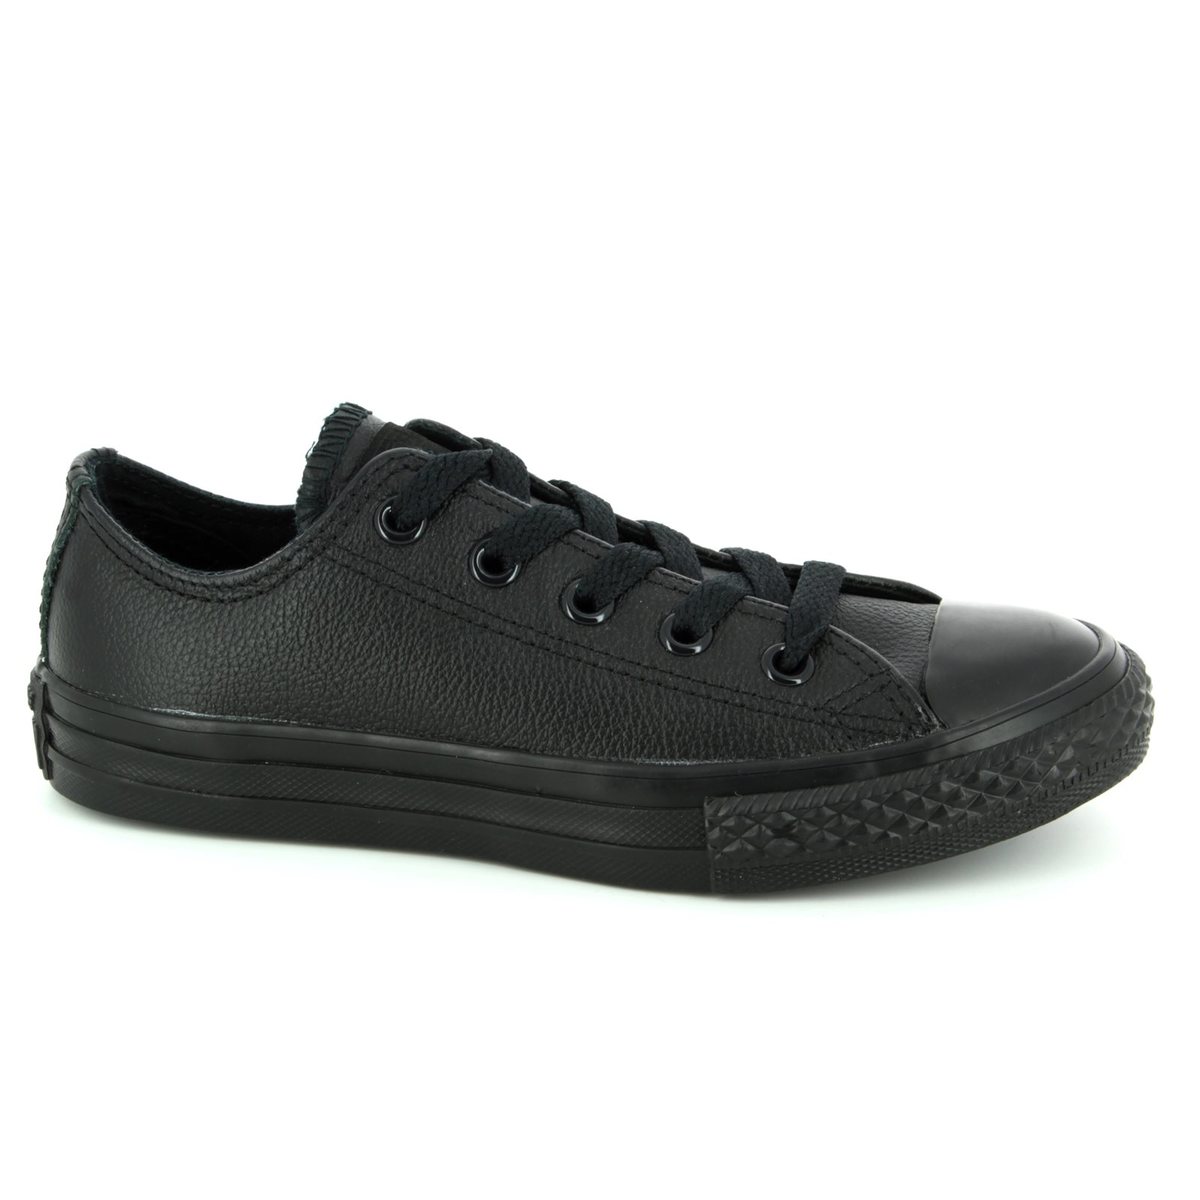 converse all star low leather hot punch mono exclusive